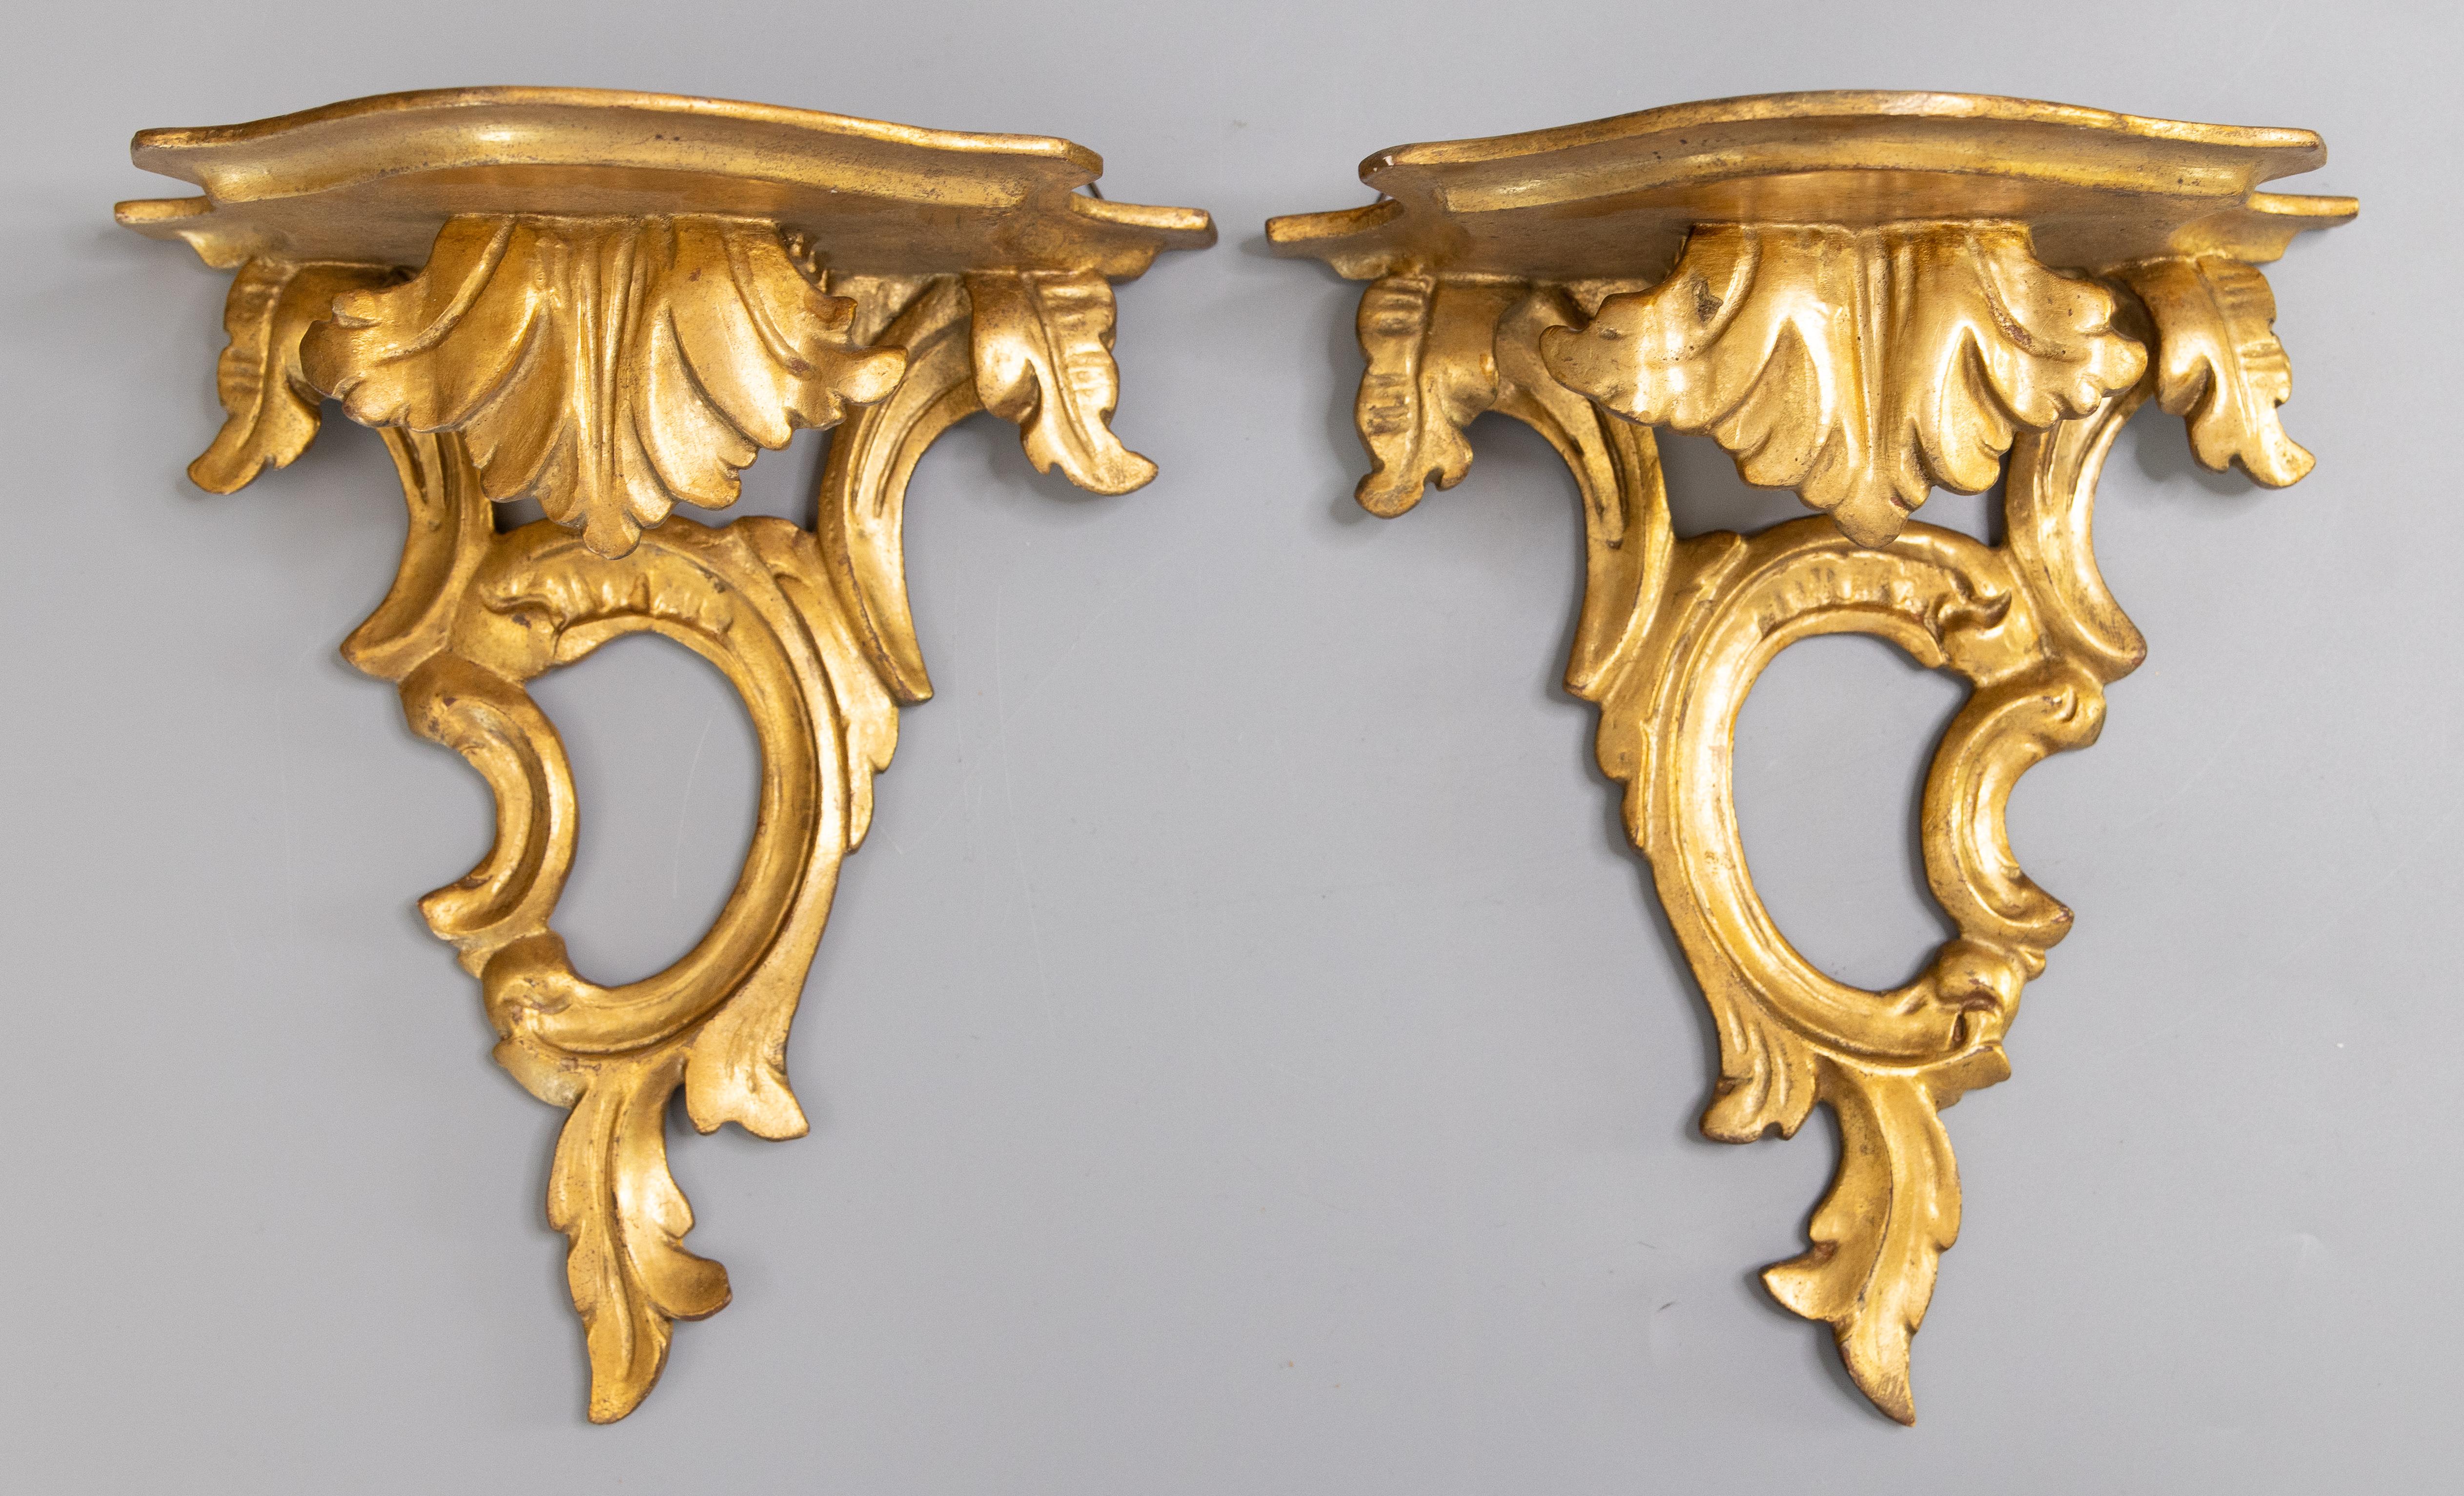 A lovely pair of midcentury Italian gilded wood wall brackets shelves. Marked 